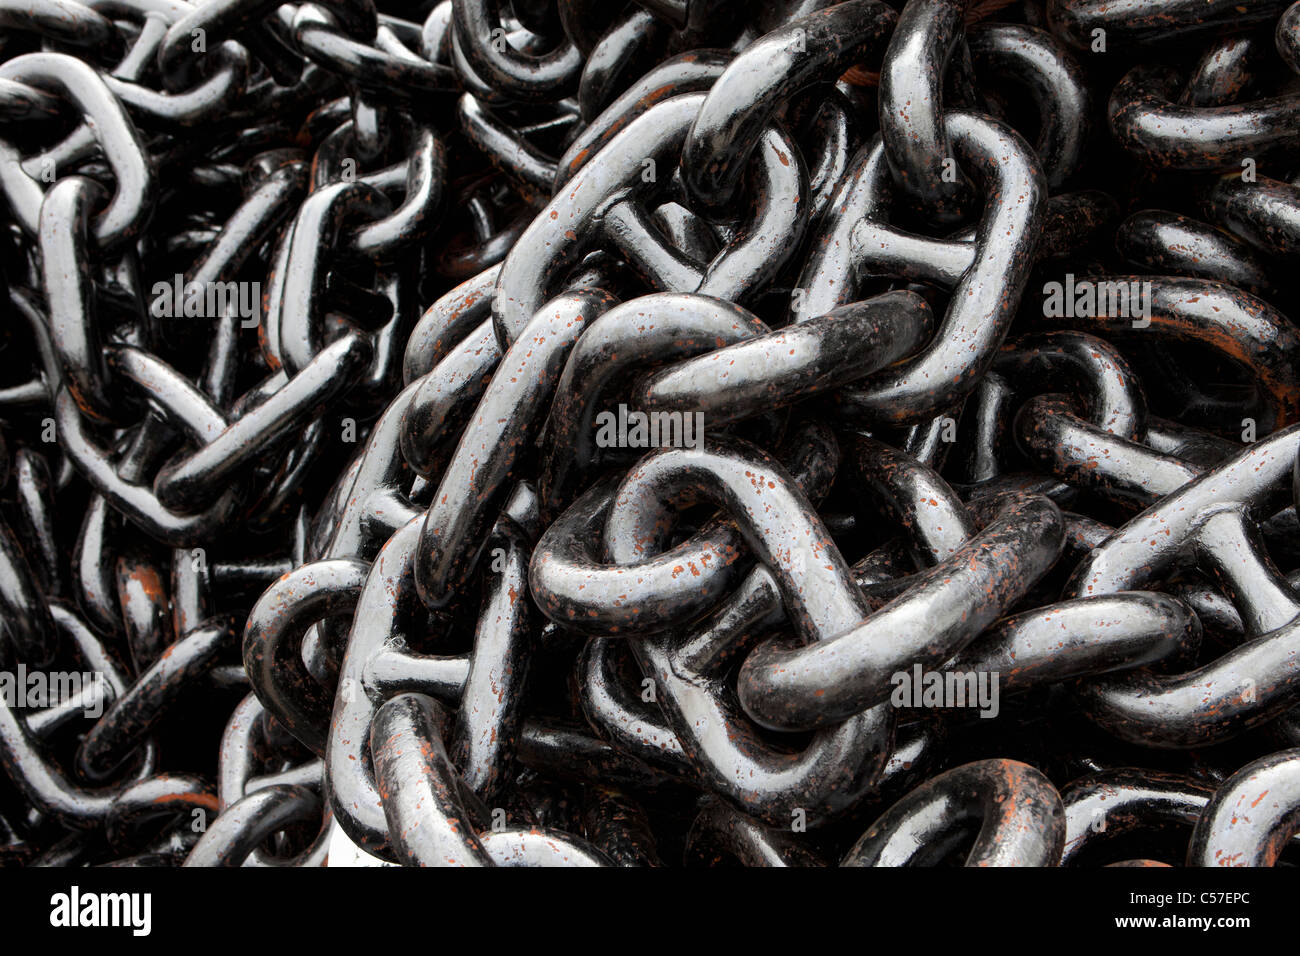 The Netherlands, Rotterdam, Port, Anchor chain of ship. Stock Photo